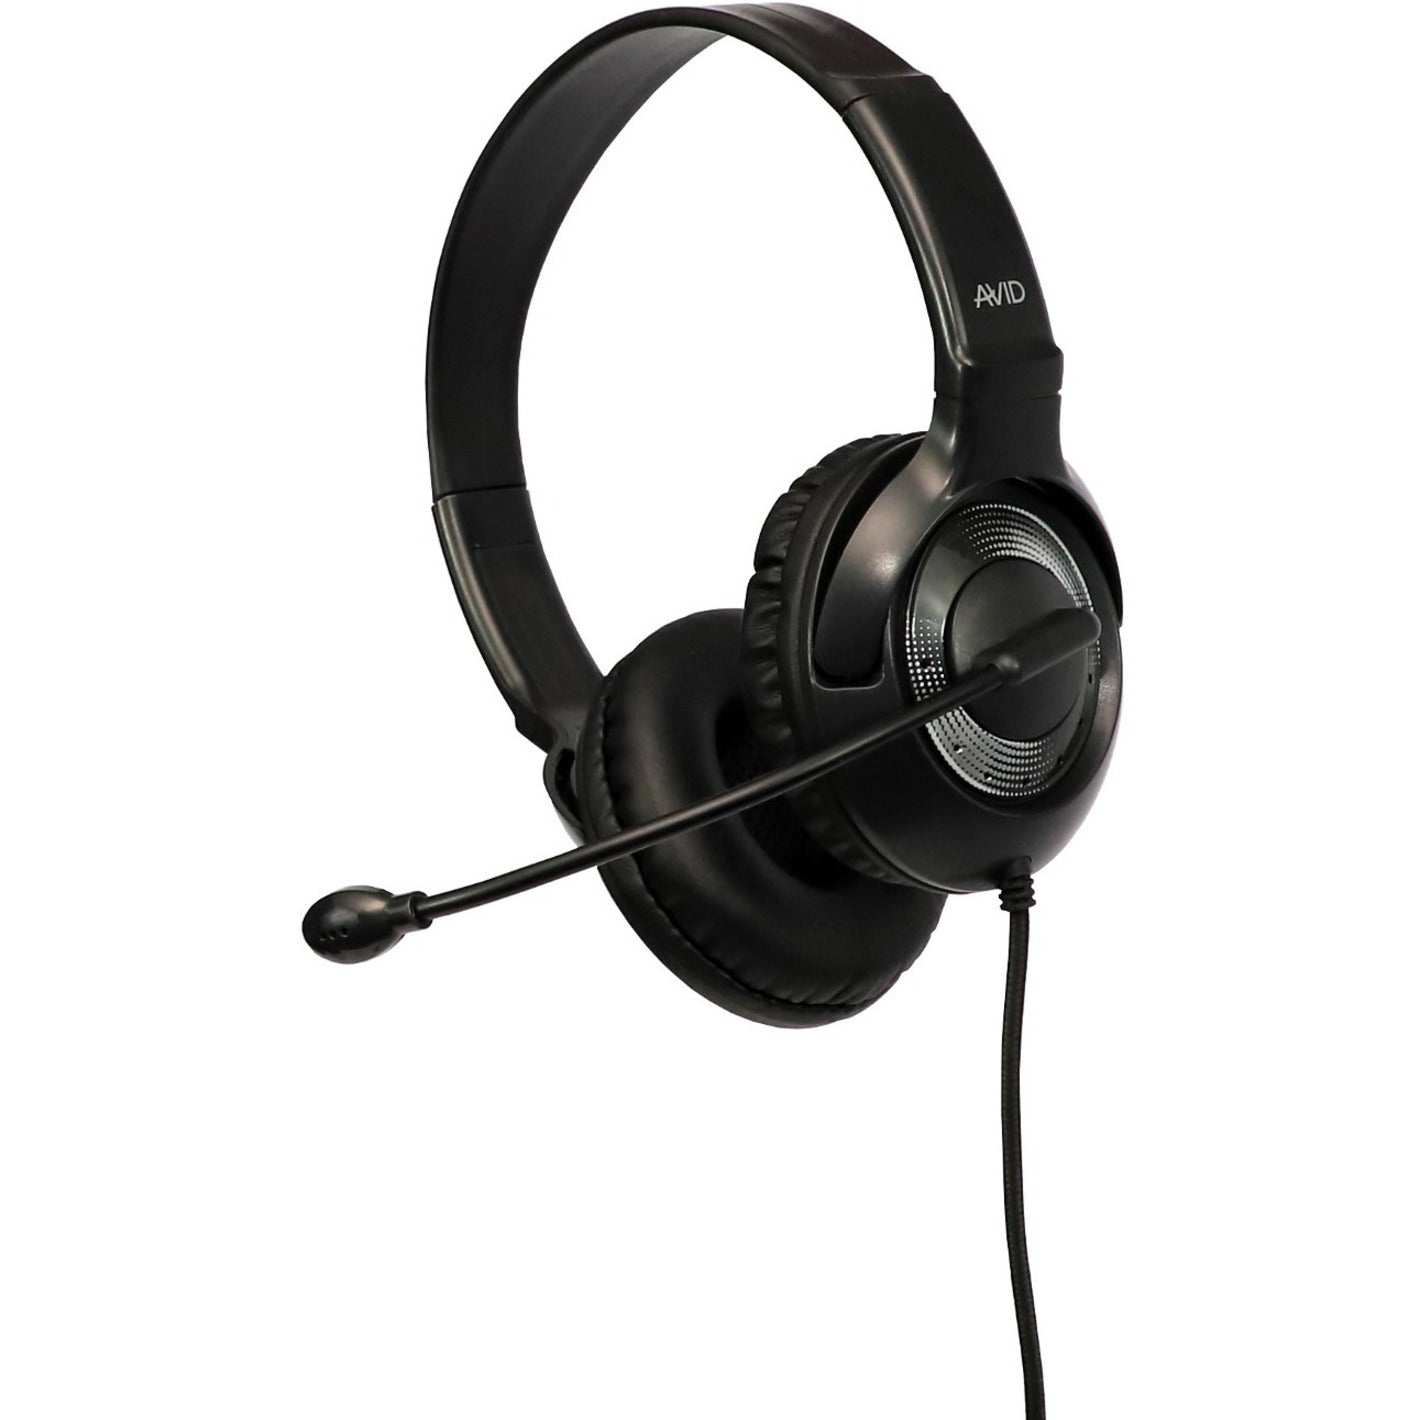 Avid 2AE55KL 2AE-55 Wired Headset with Mic Black, Adjustable Headband, Noise Reduction, Comfortable